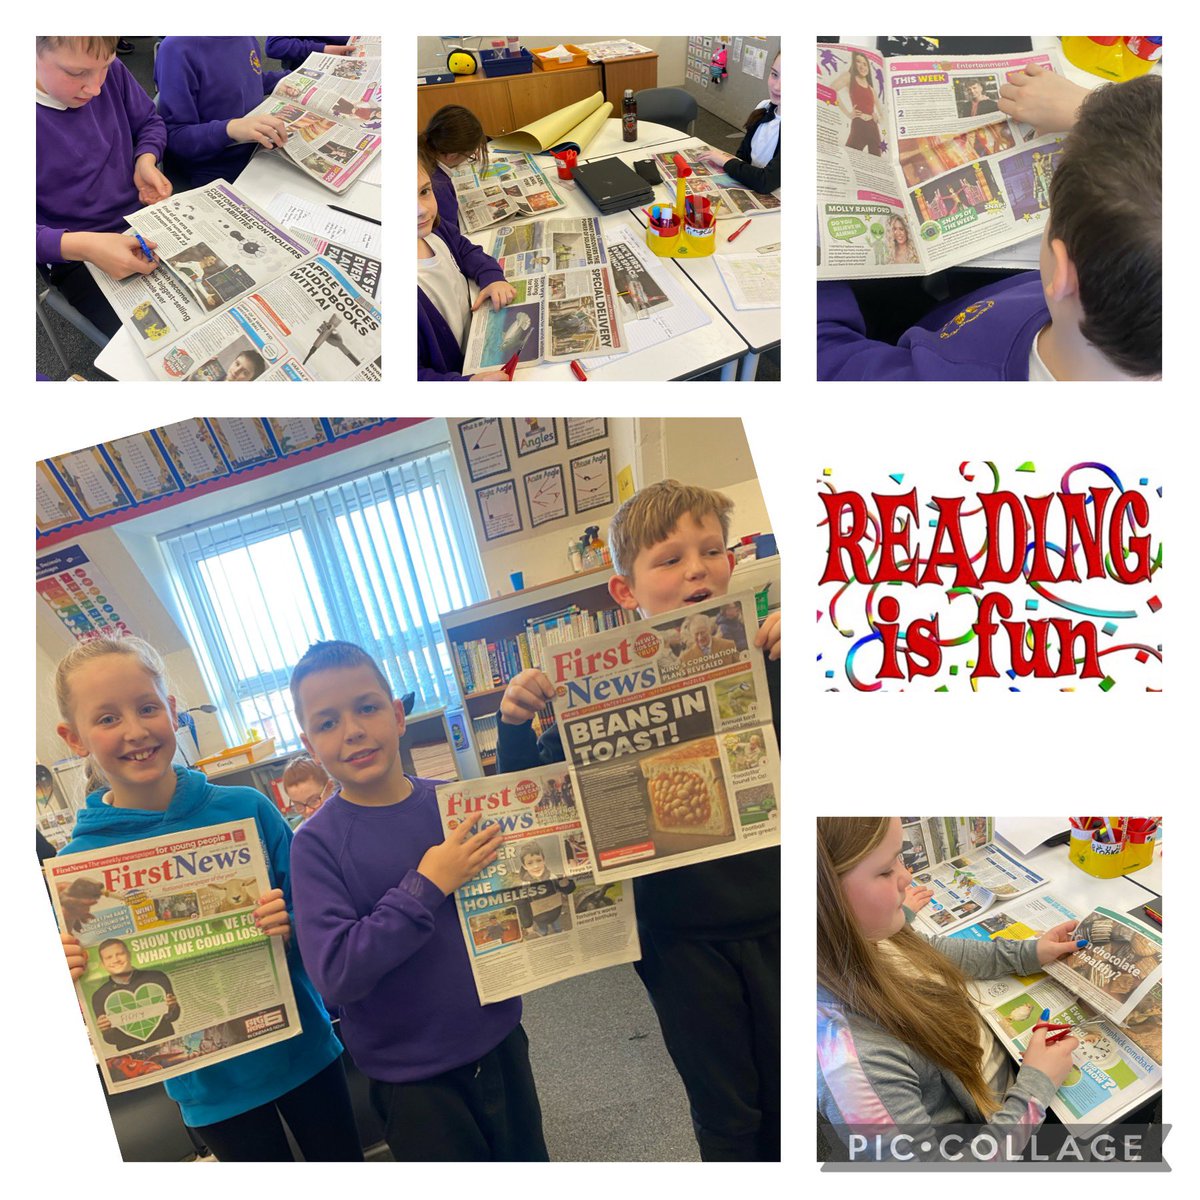 We love the enthusiasm from children when they scout for their favourite stories in First News Newspapers. The Beans in Toast headline was a real eye catcher and a dish children would love to try. Junior food tasters at the ready! @First_News @jamieoliver @SHEP_Flintshire